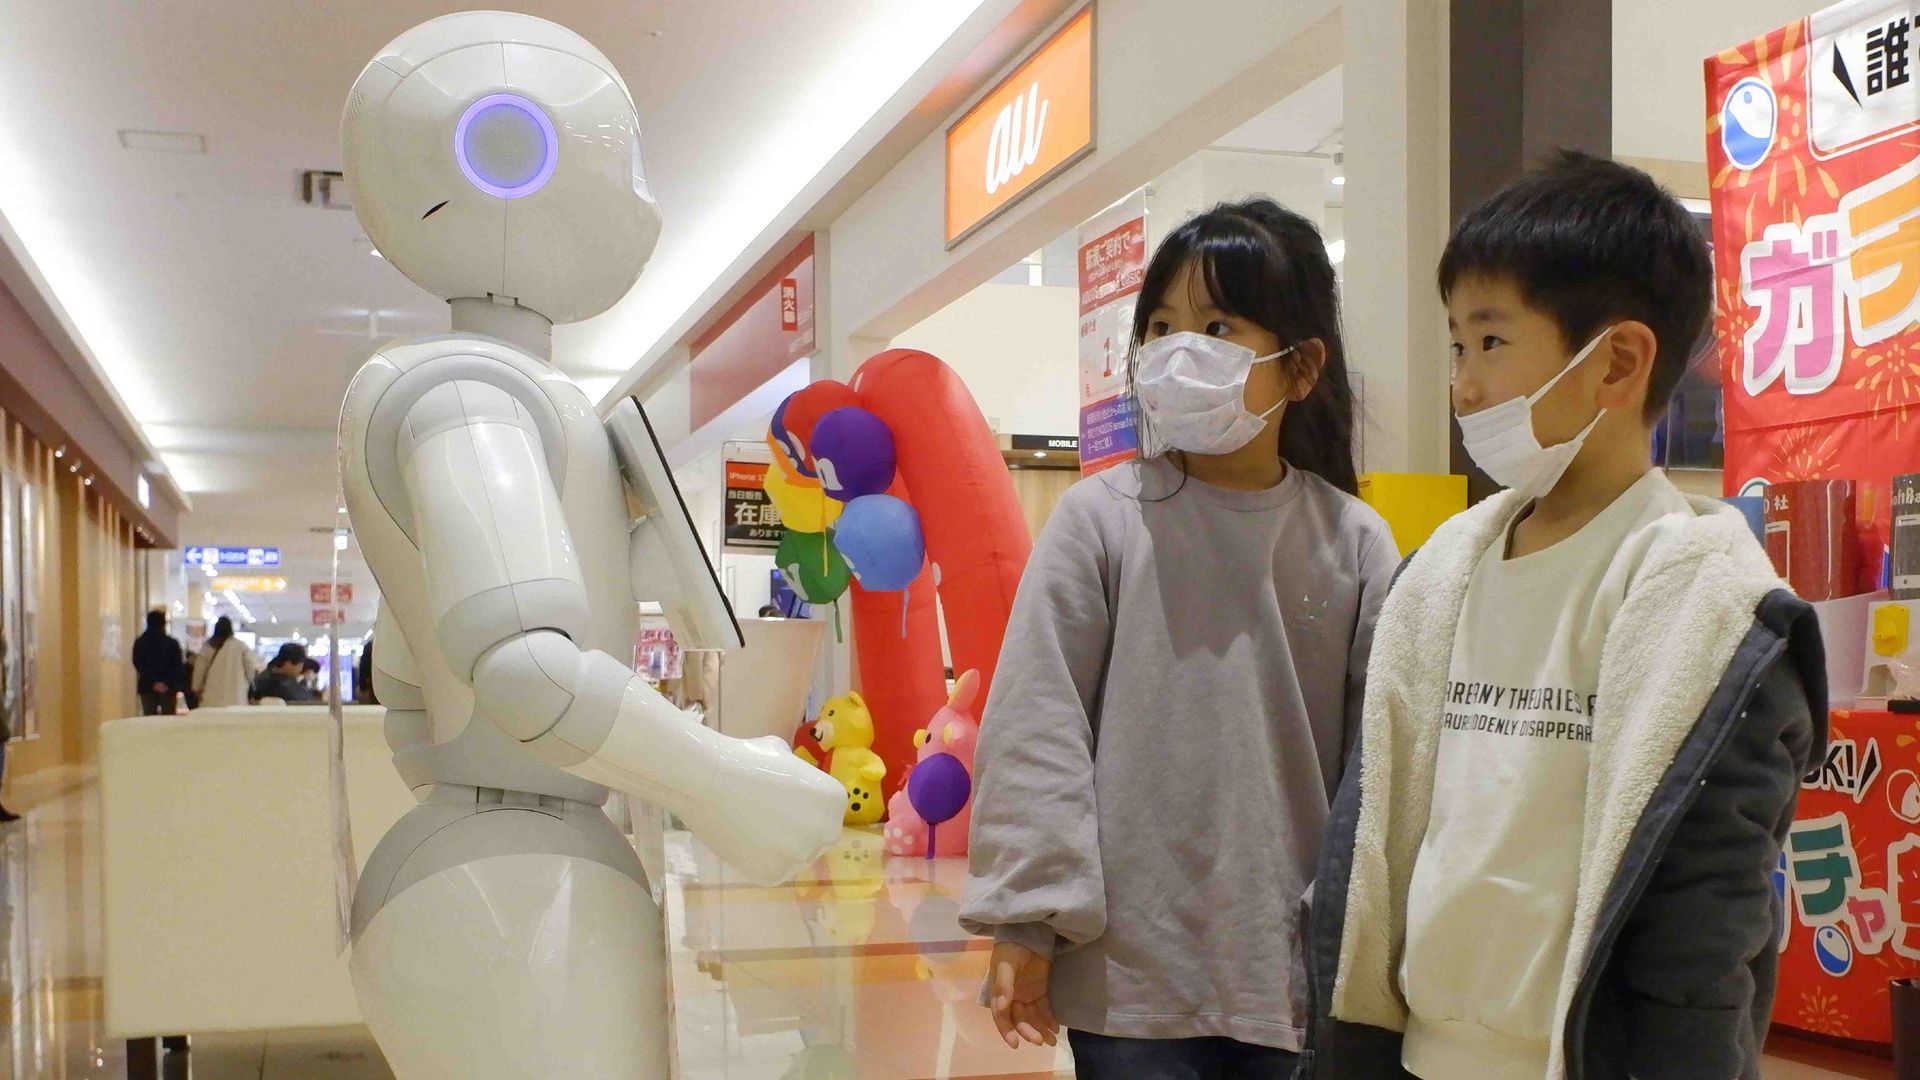 Children in a shopping mall with a life-sized robot.